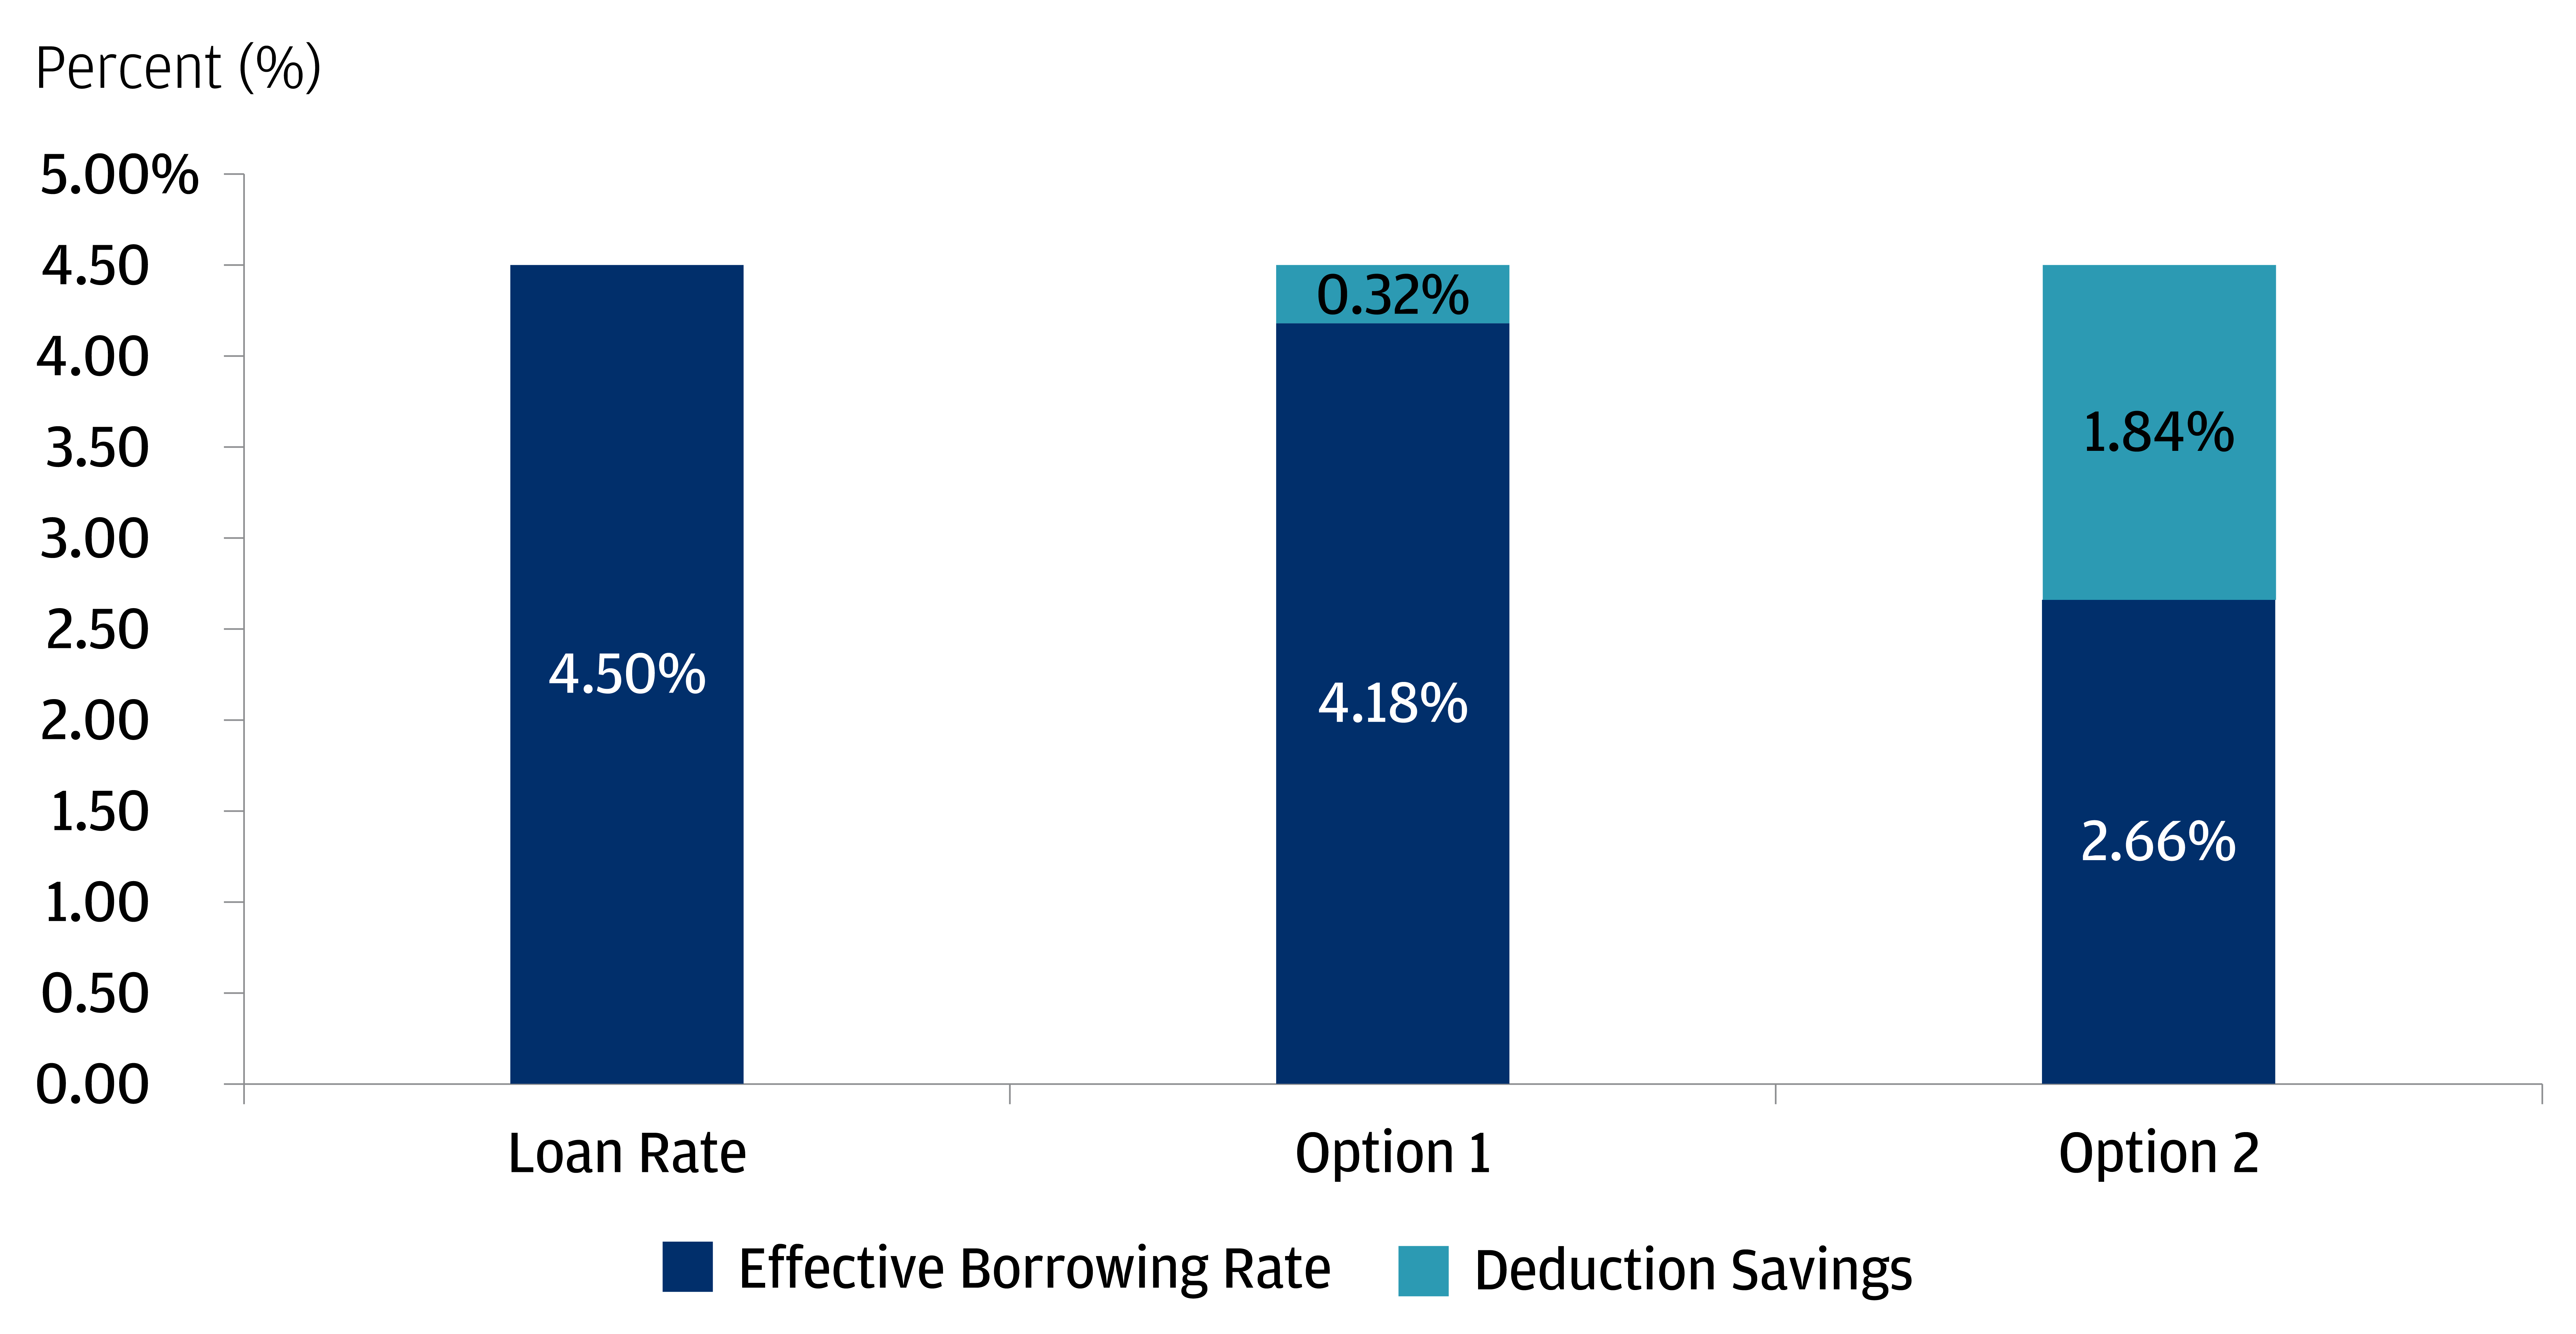 This chart compares the effective borrowing rate and deduction savings of Option 1 and Option 2